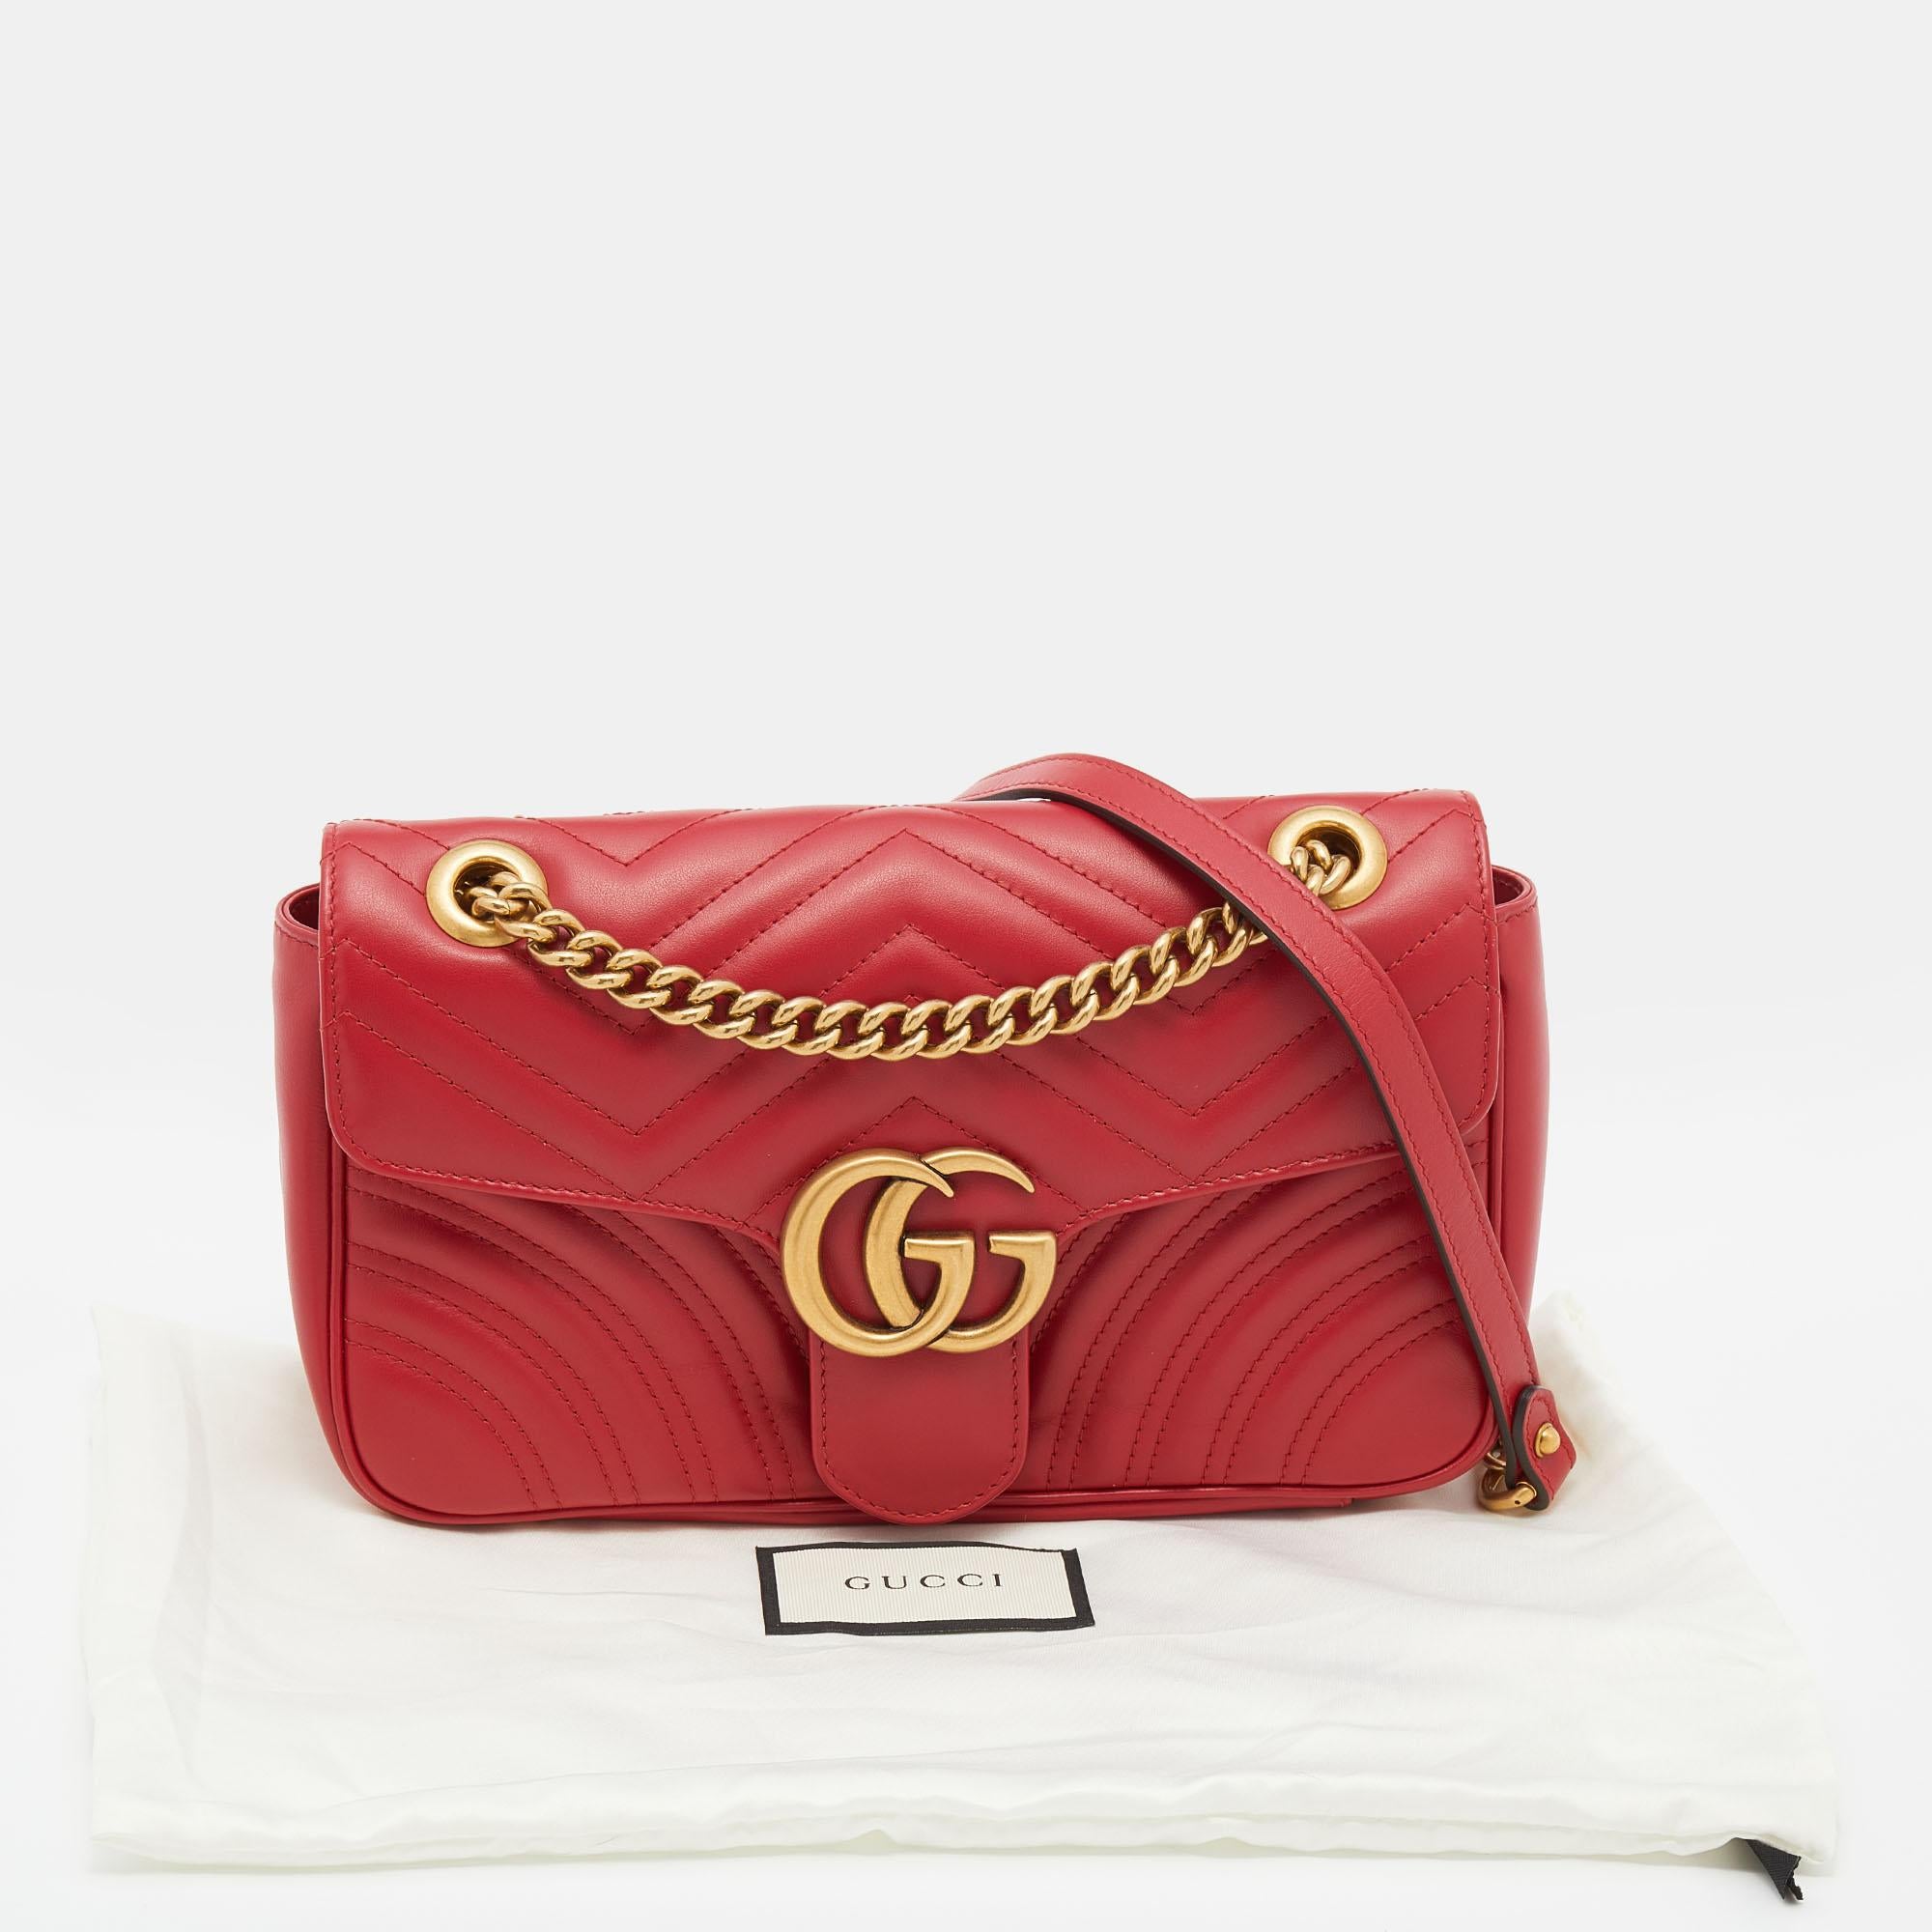 Gucci Red Matelassé Leather Small GG Marmont Shoulder Bag 5